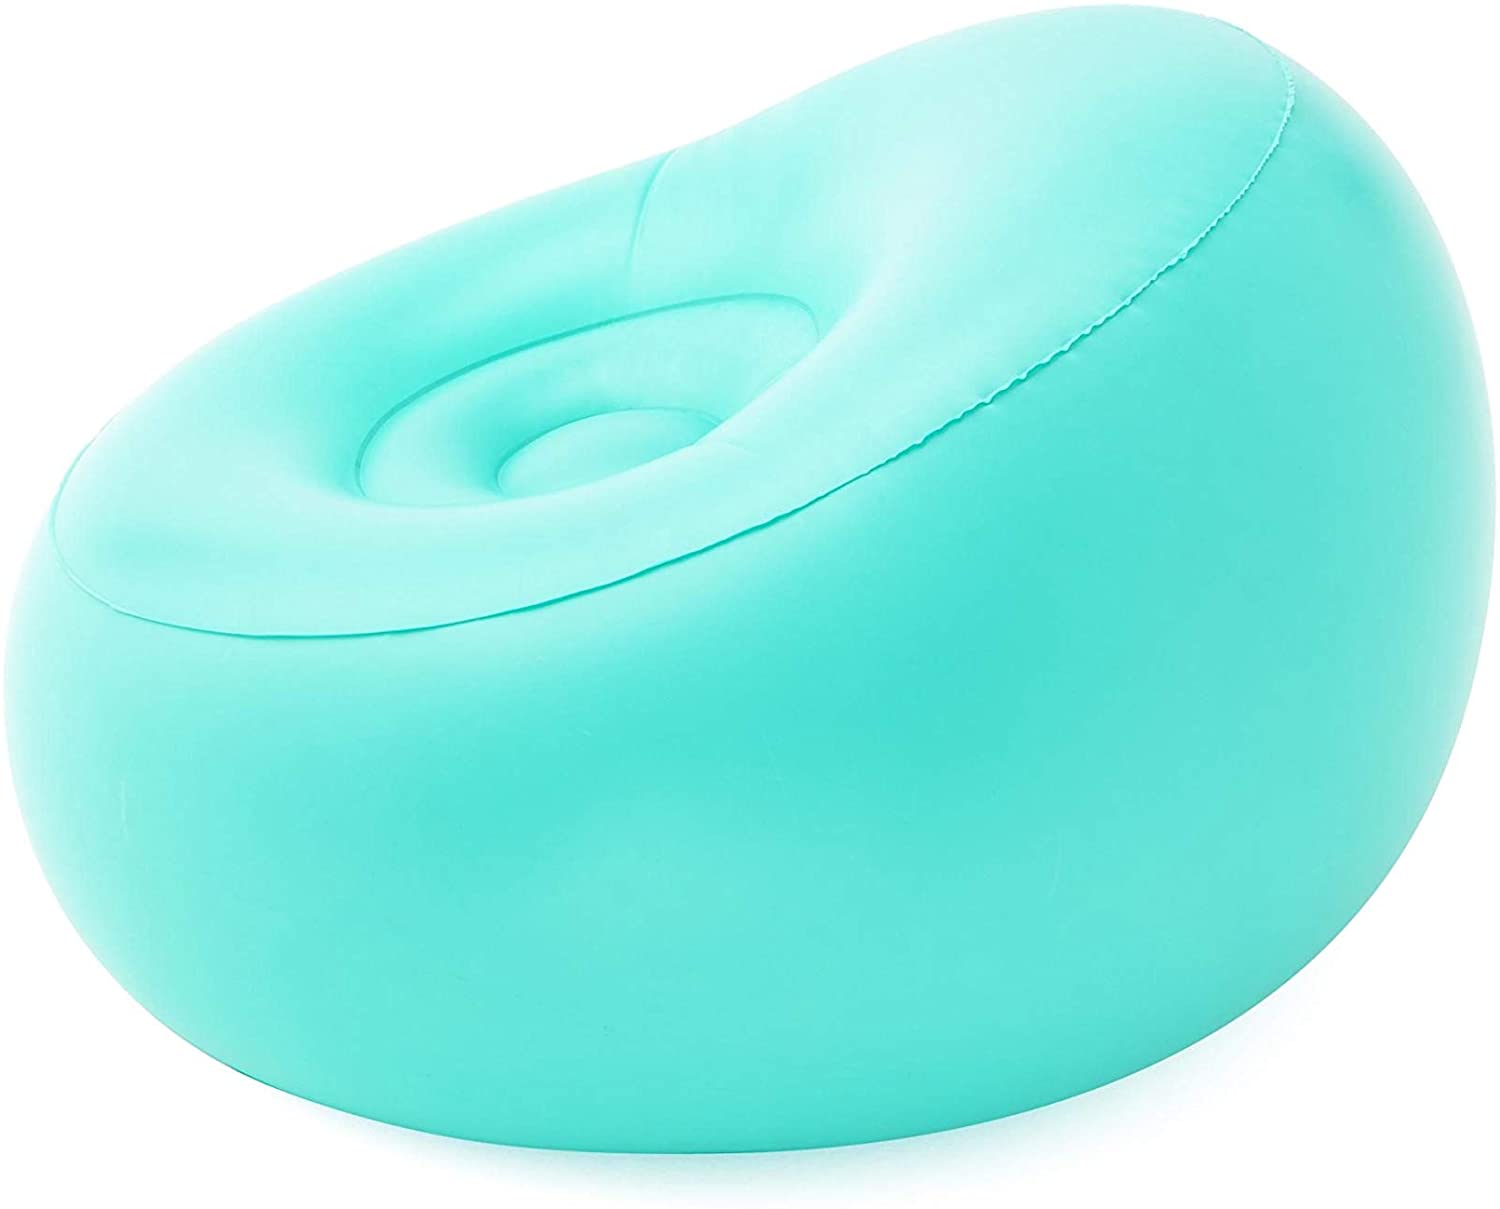 Bestway PoshPod Inflatable Chair For Pool or Indoor, inflatable chair for pool, lounge inflatable chair, bestway inflatable chair for inside, inflatable pod chair, multi-purpose inflatable chair, portable inflatable chair